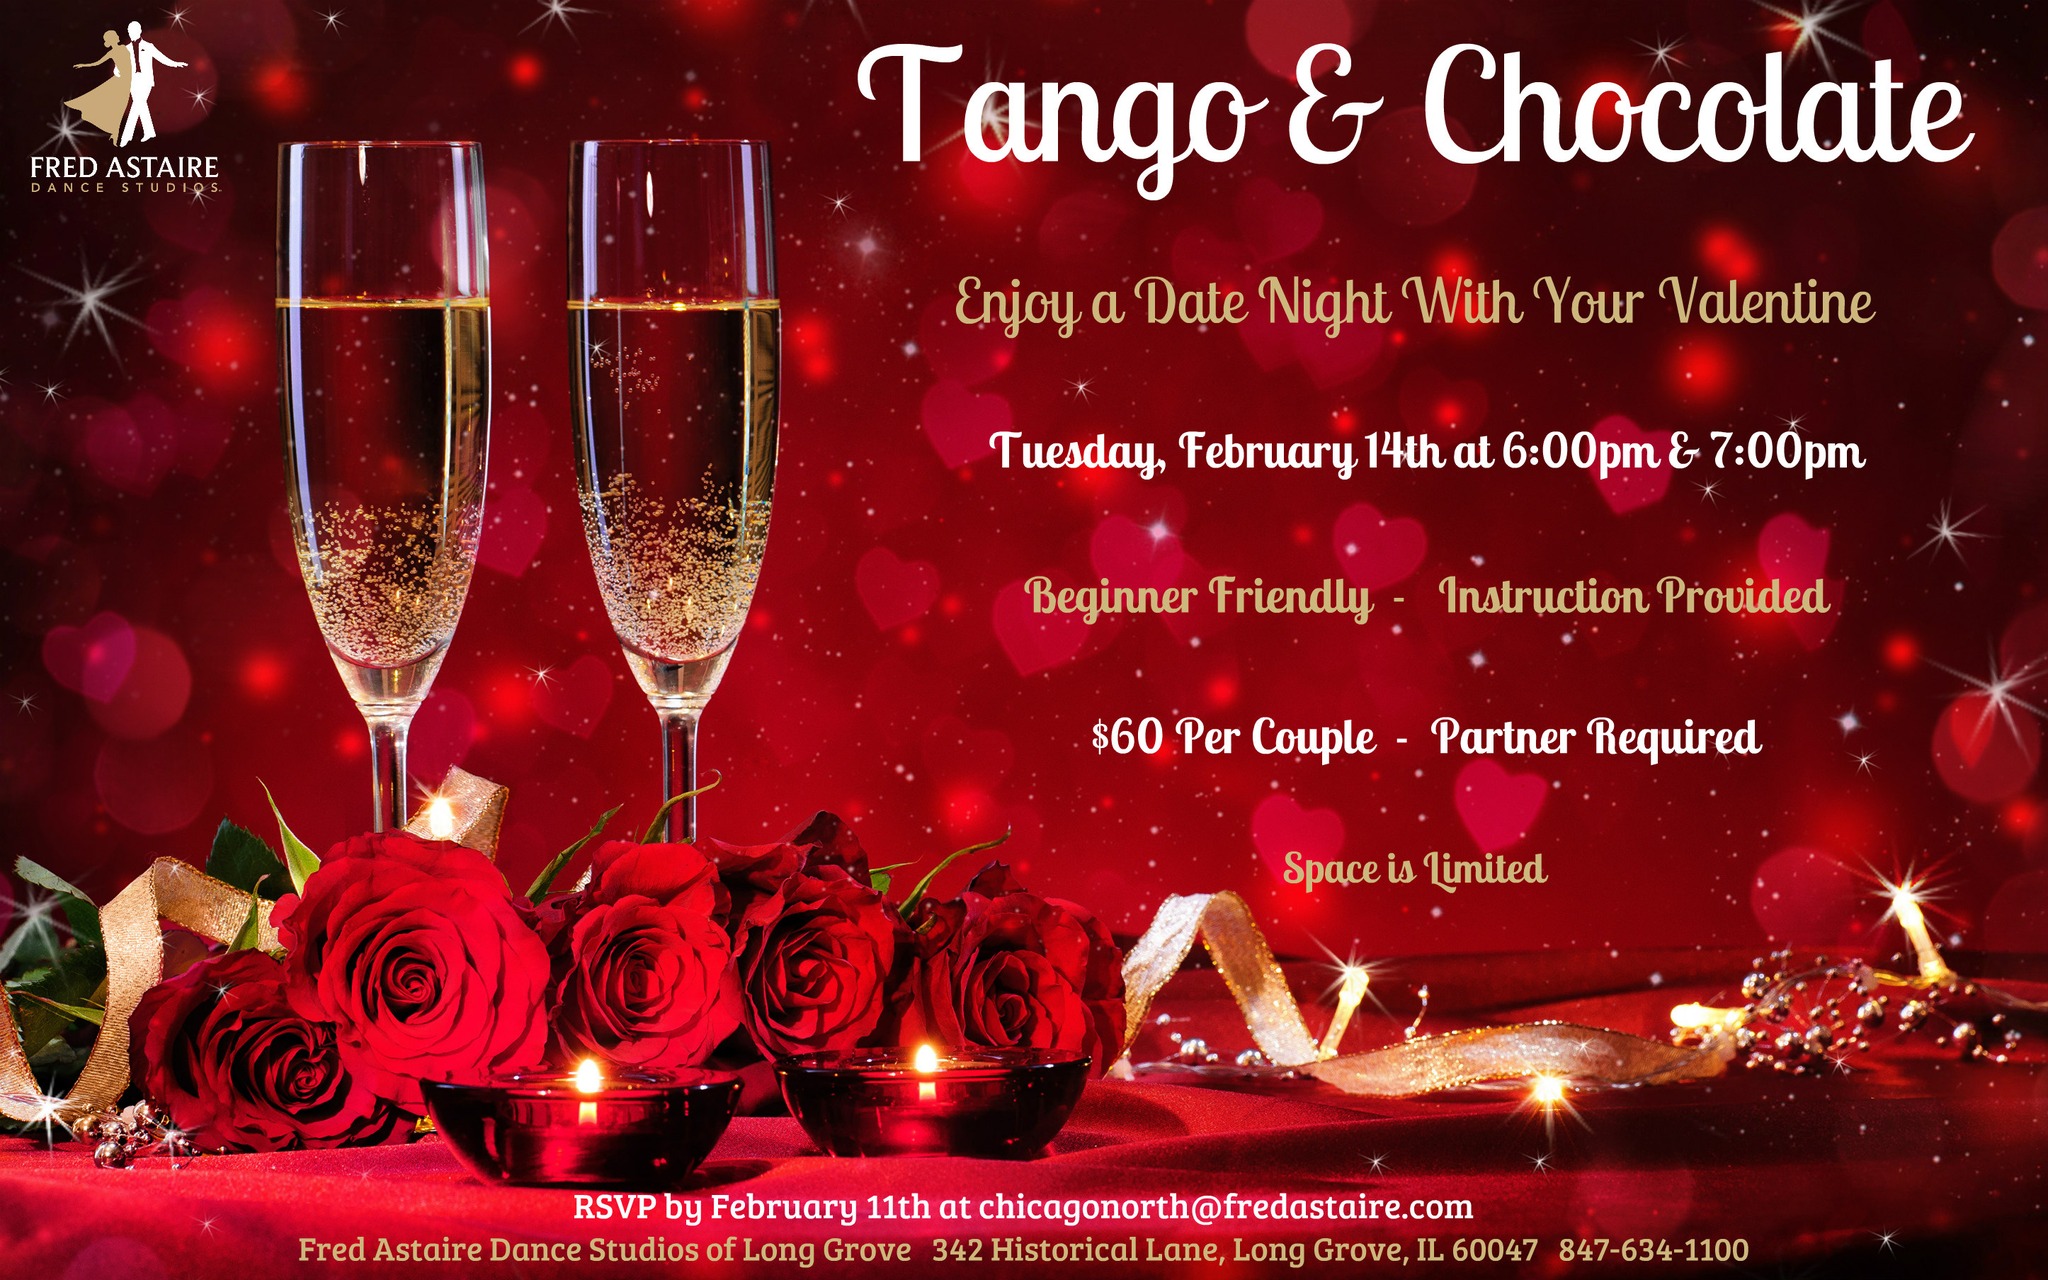 Tango & Chocolate at Fred Astaire Dance Studios